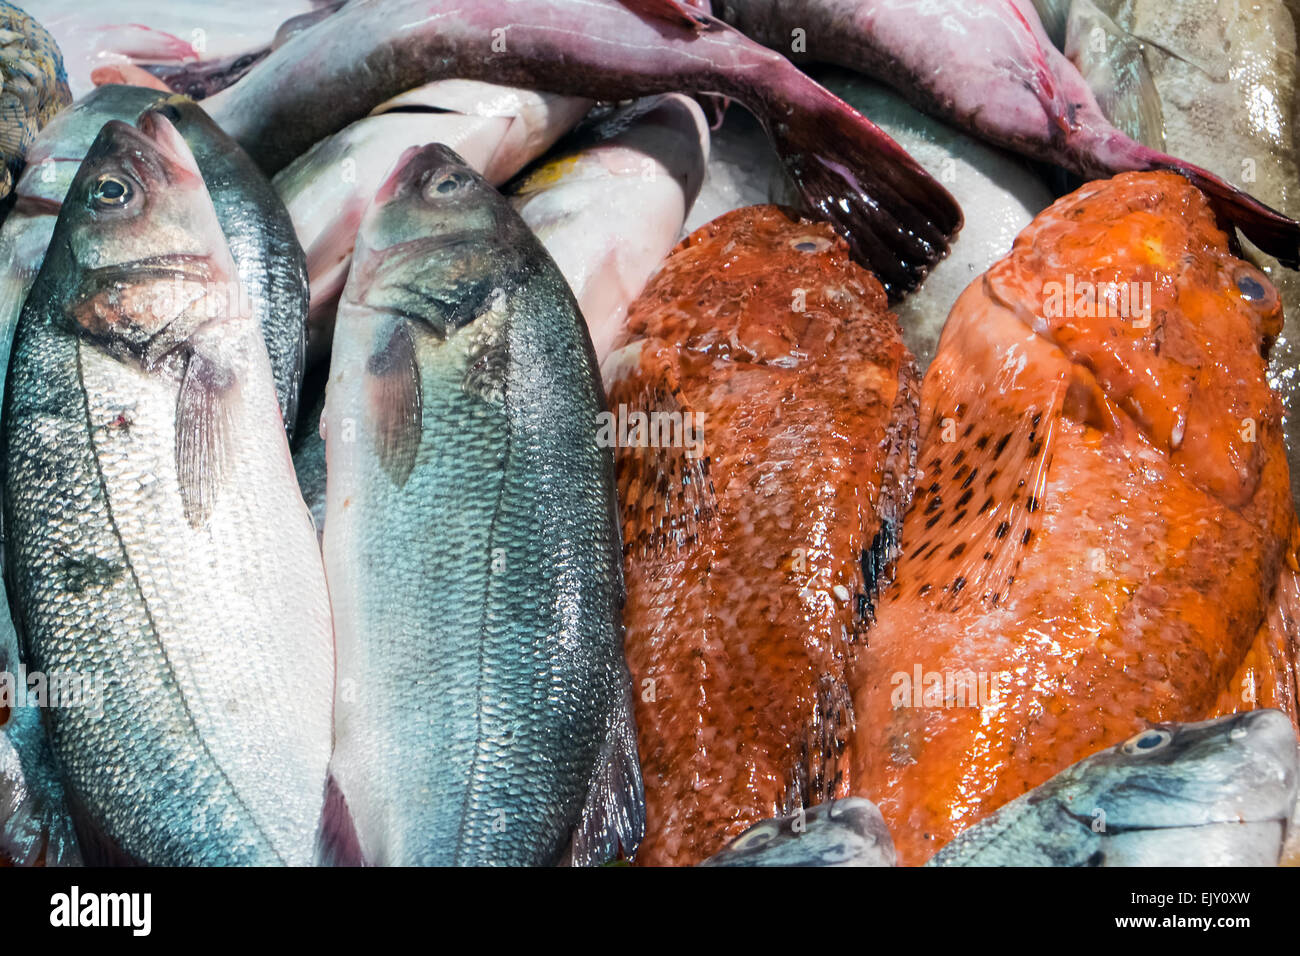 Fresh fish is sold at a market Stock Photo